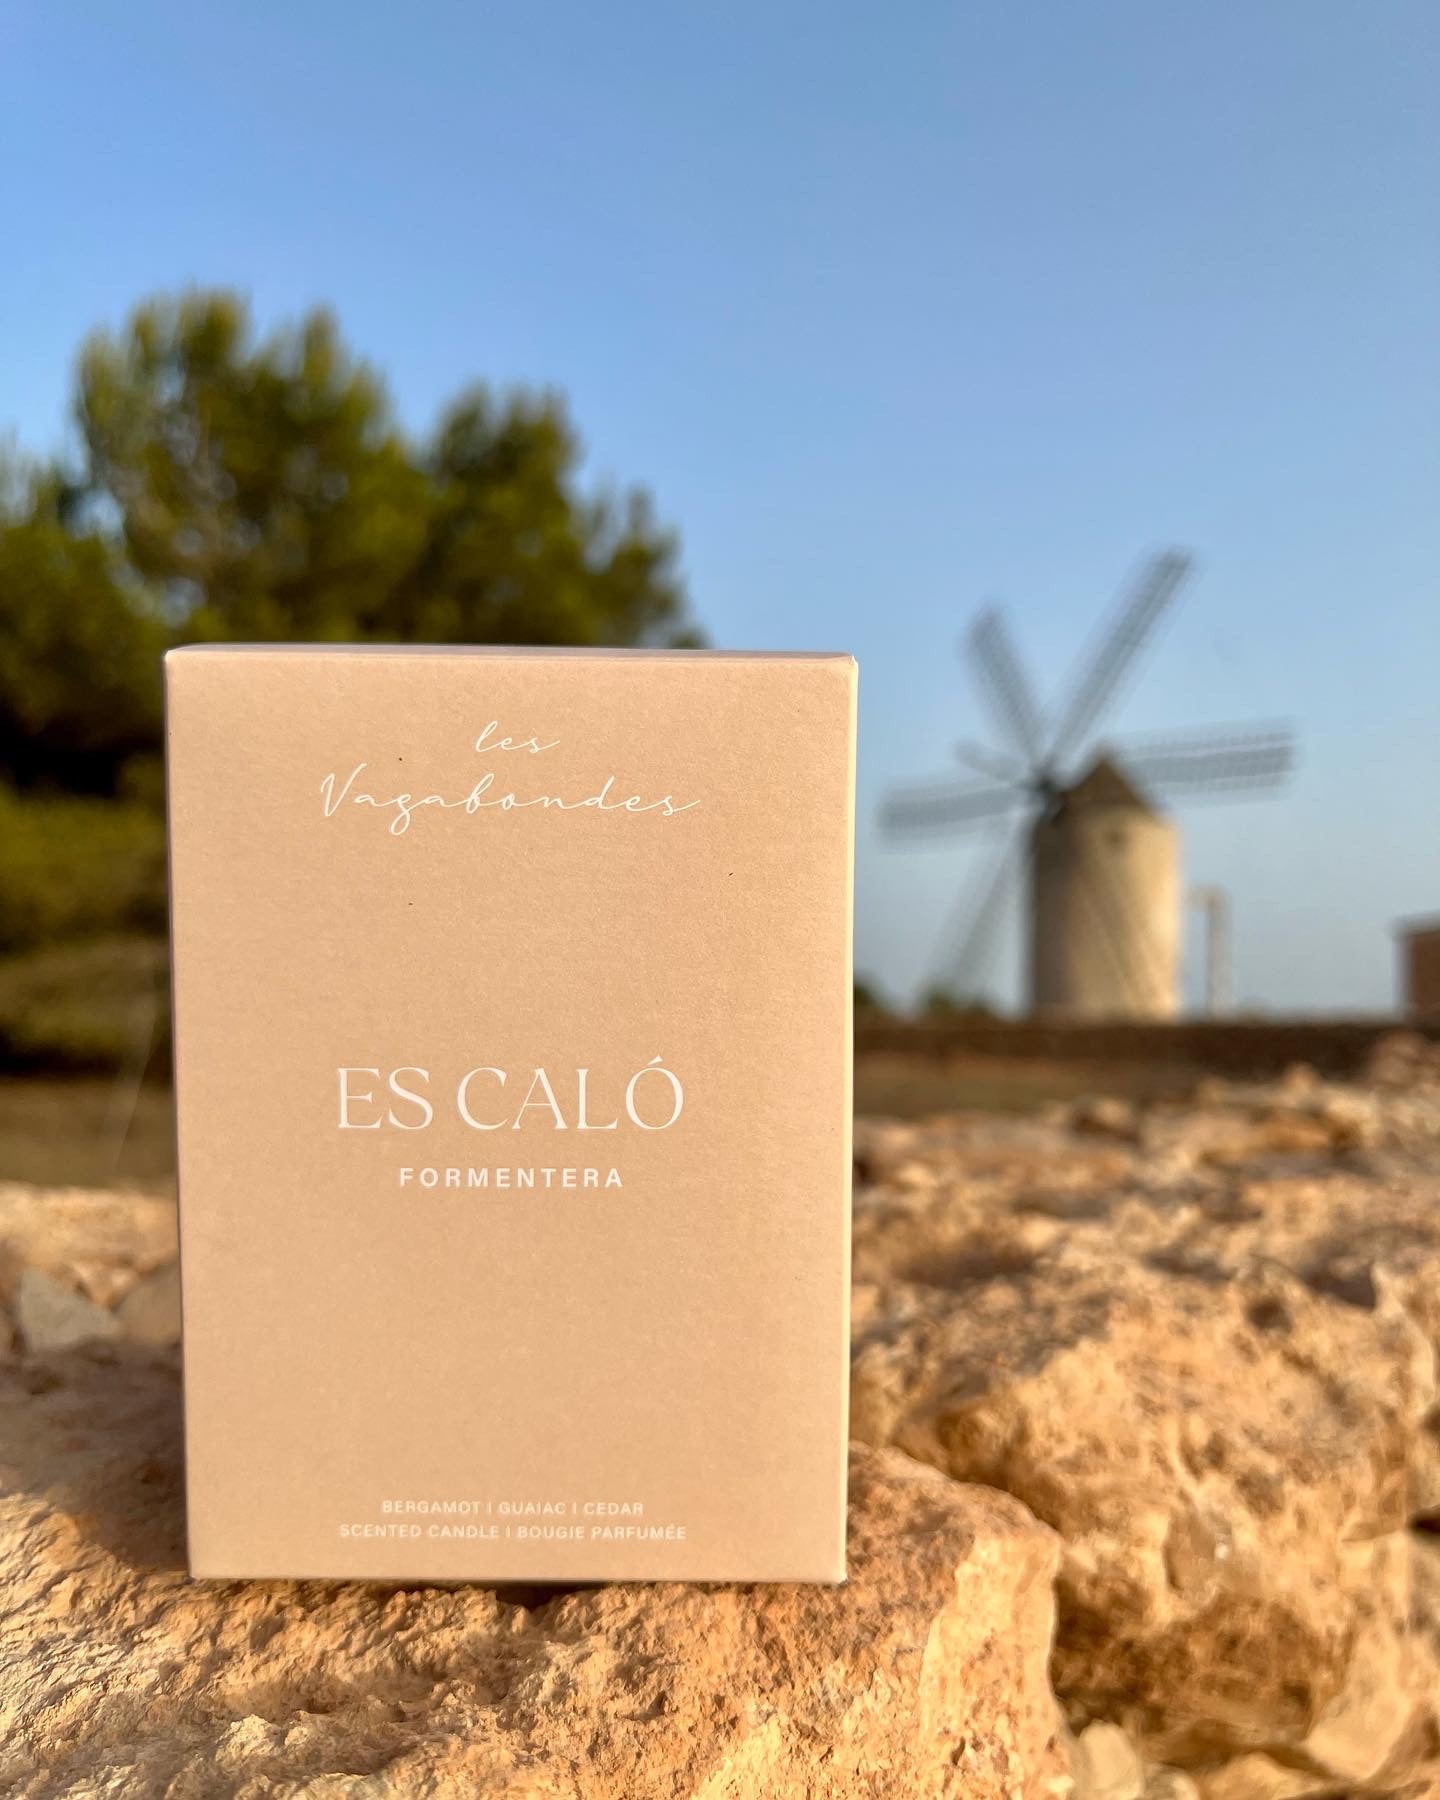 Es Calo candle box on top of a rustic wall, in front of a Formentera landscape